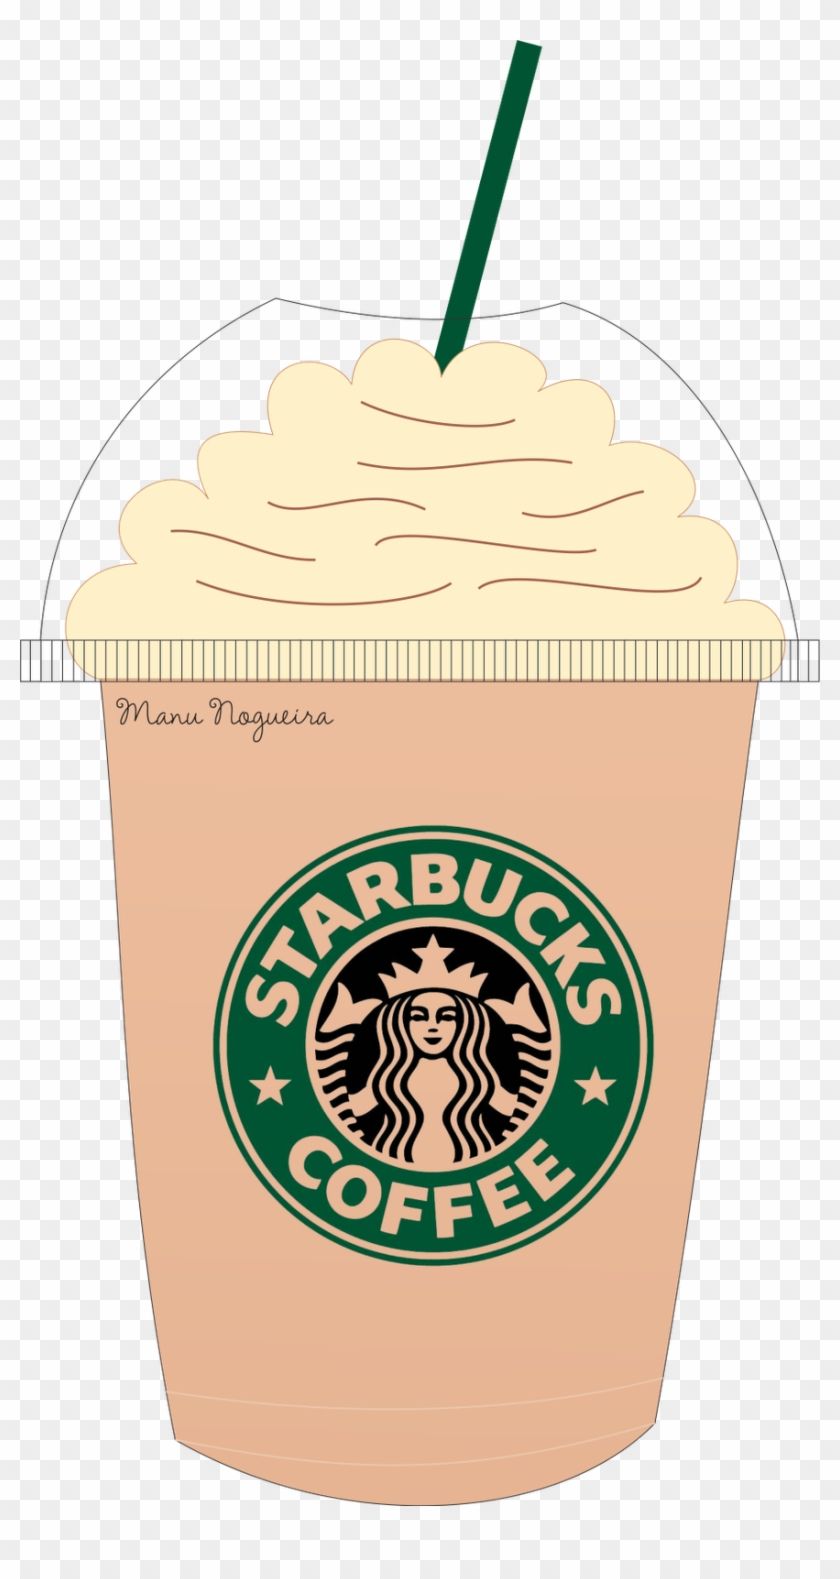 Coffee Starbucks Png Cup Texture Transparent PNG Clipart Image Download